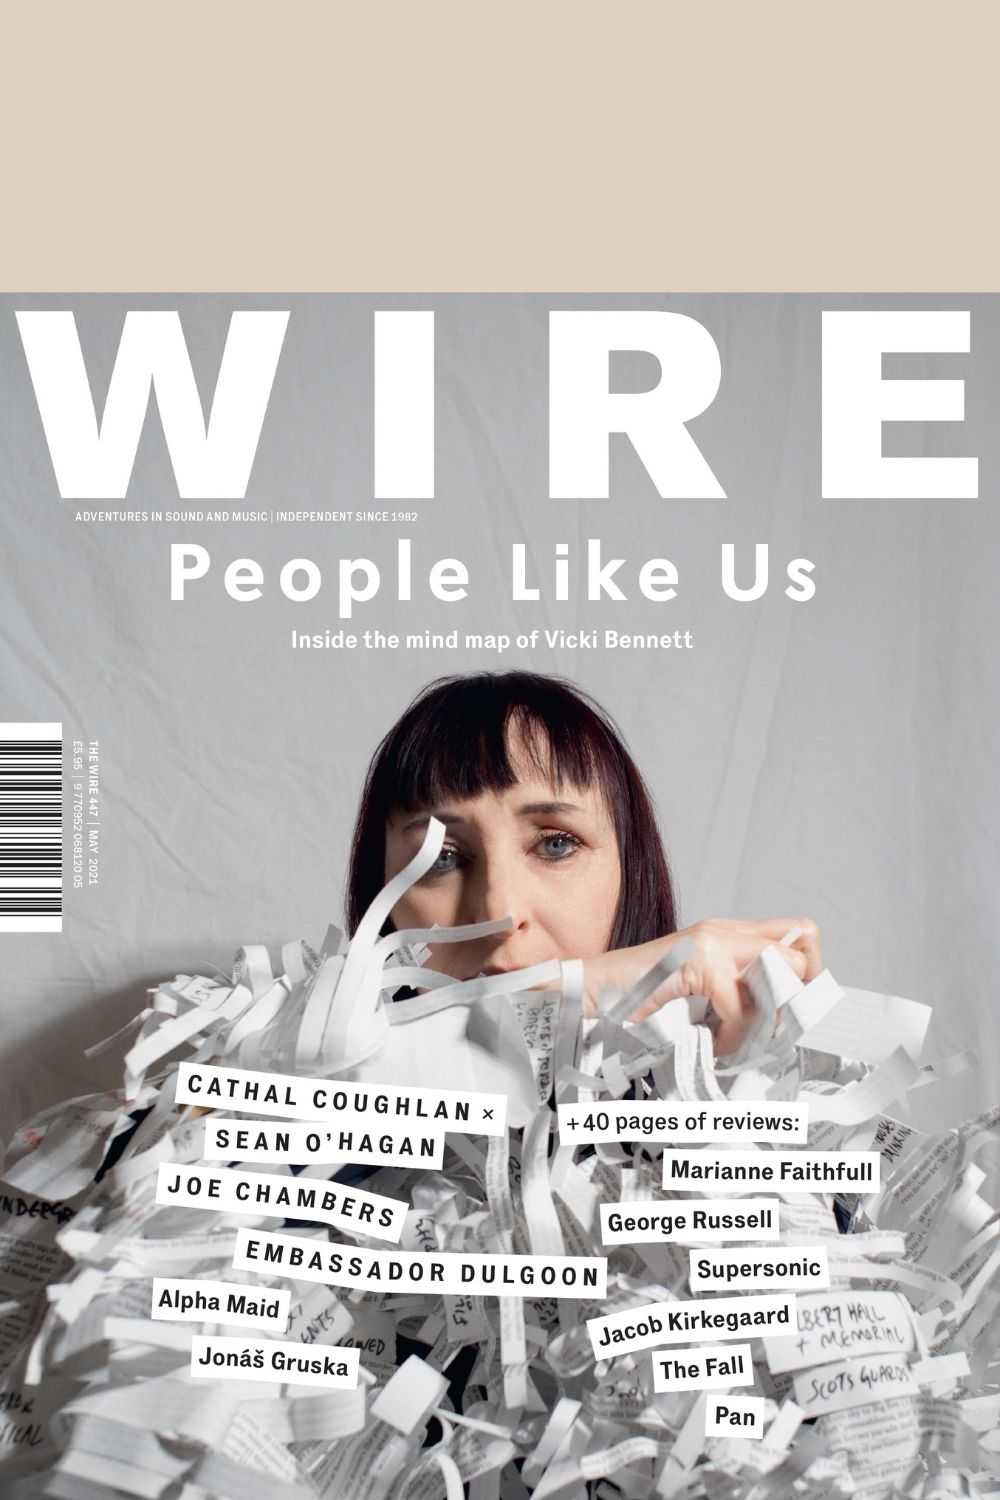 Front cover of The Wire Magazine Issue 447 featuring Vicki Bennett